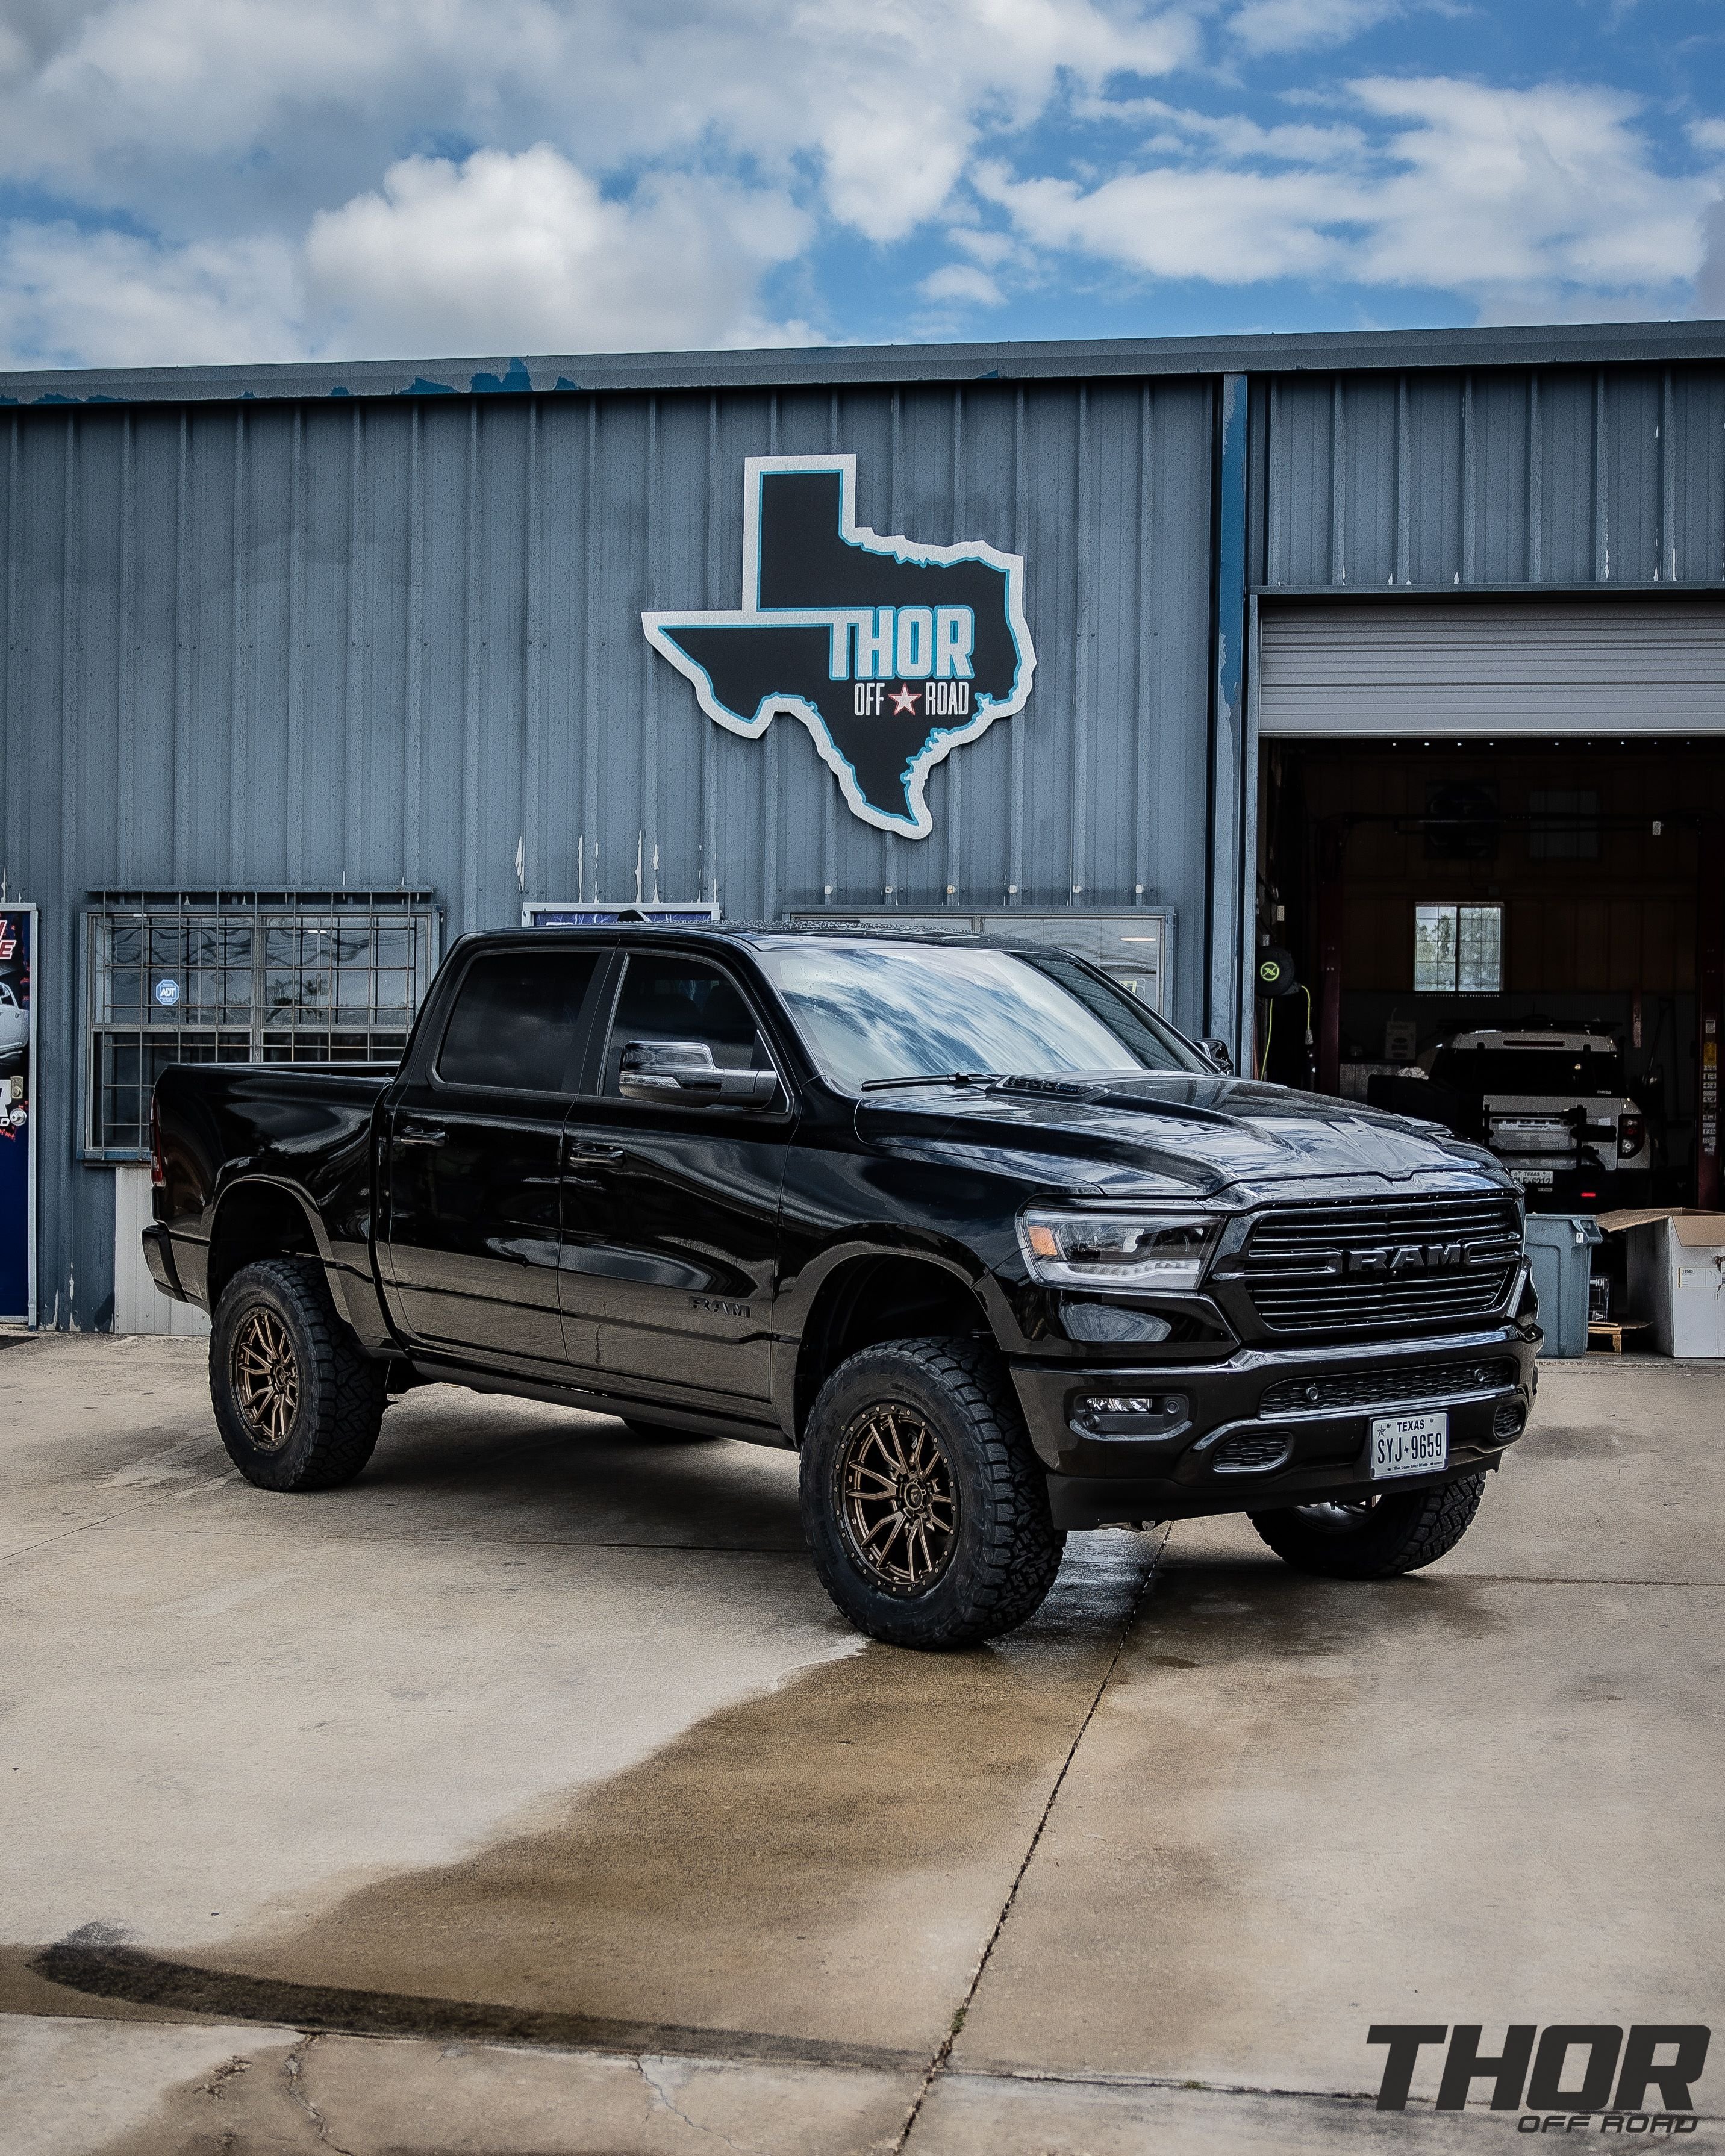 2023 RAM 1500 in Black with BDS 6" Lift System, Fuel Rebel 20x9" Bronze Wheels, 35x12.50R20 Nitto Recon Grappler Tires